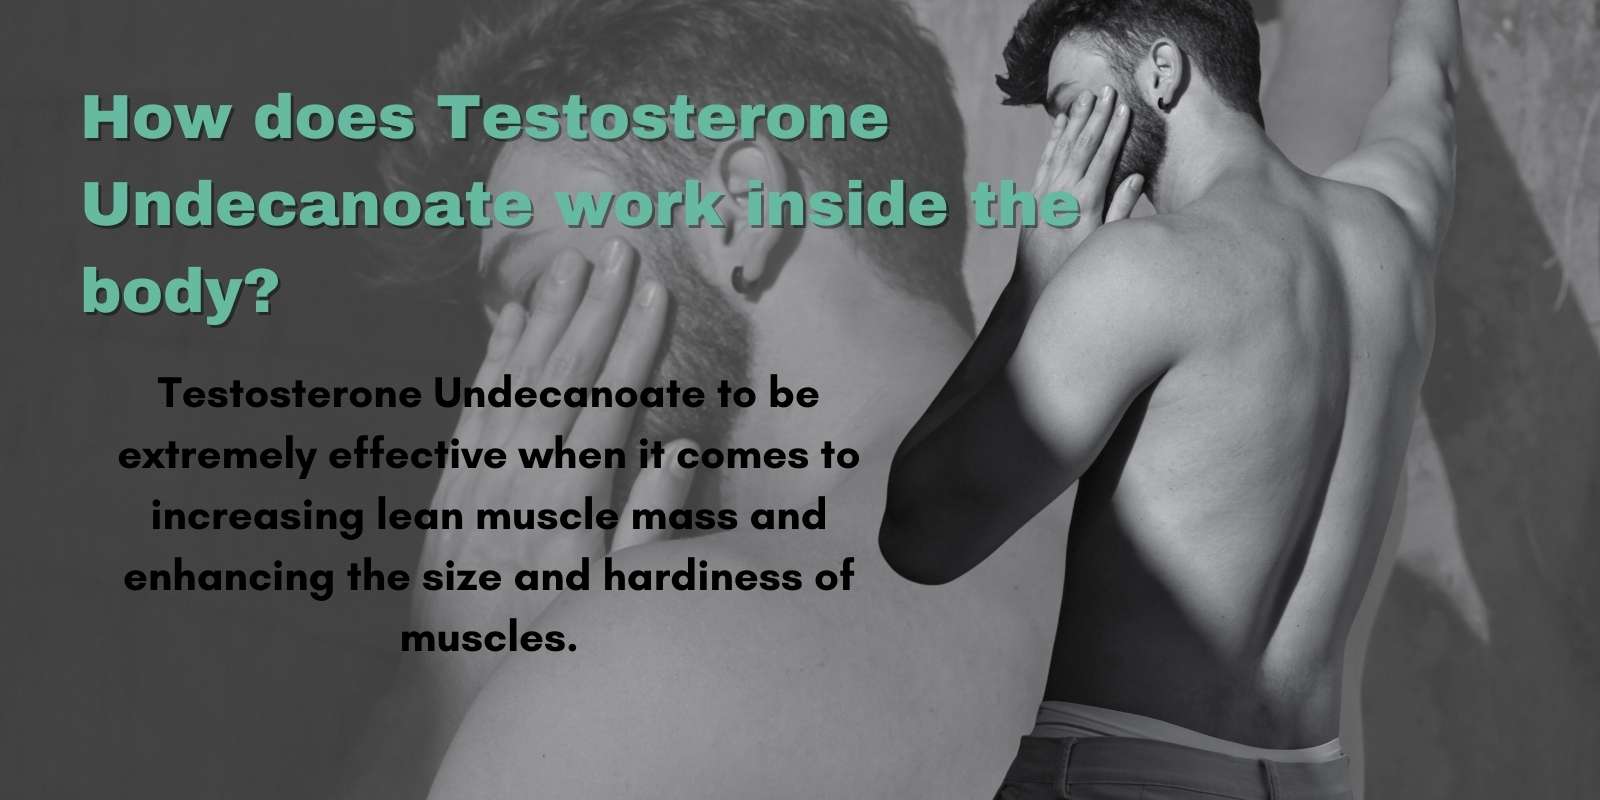 How does Testosterone Undecanoate work inside the body?